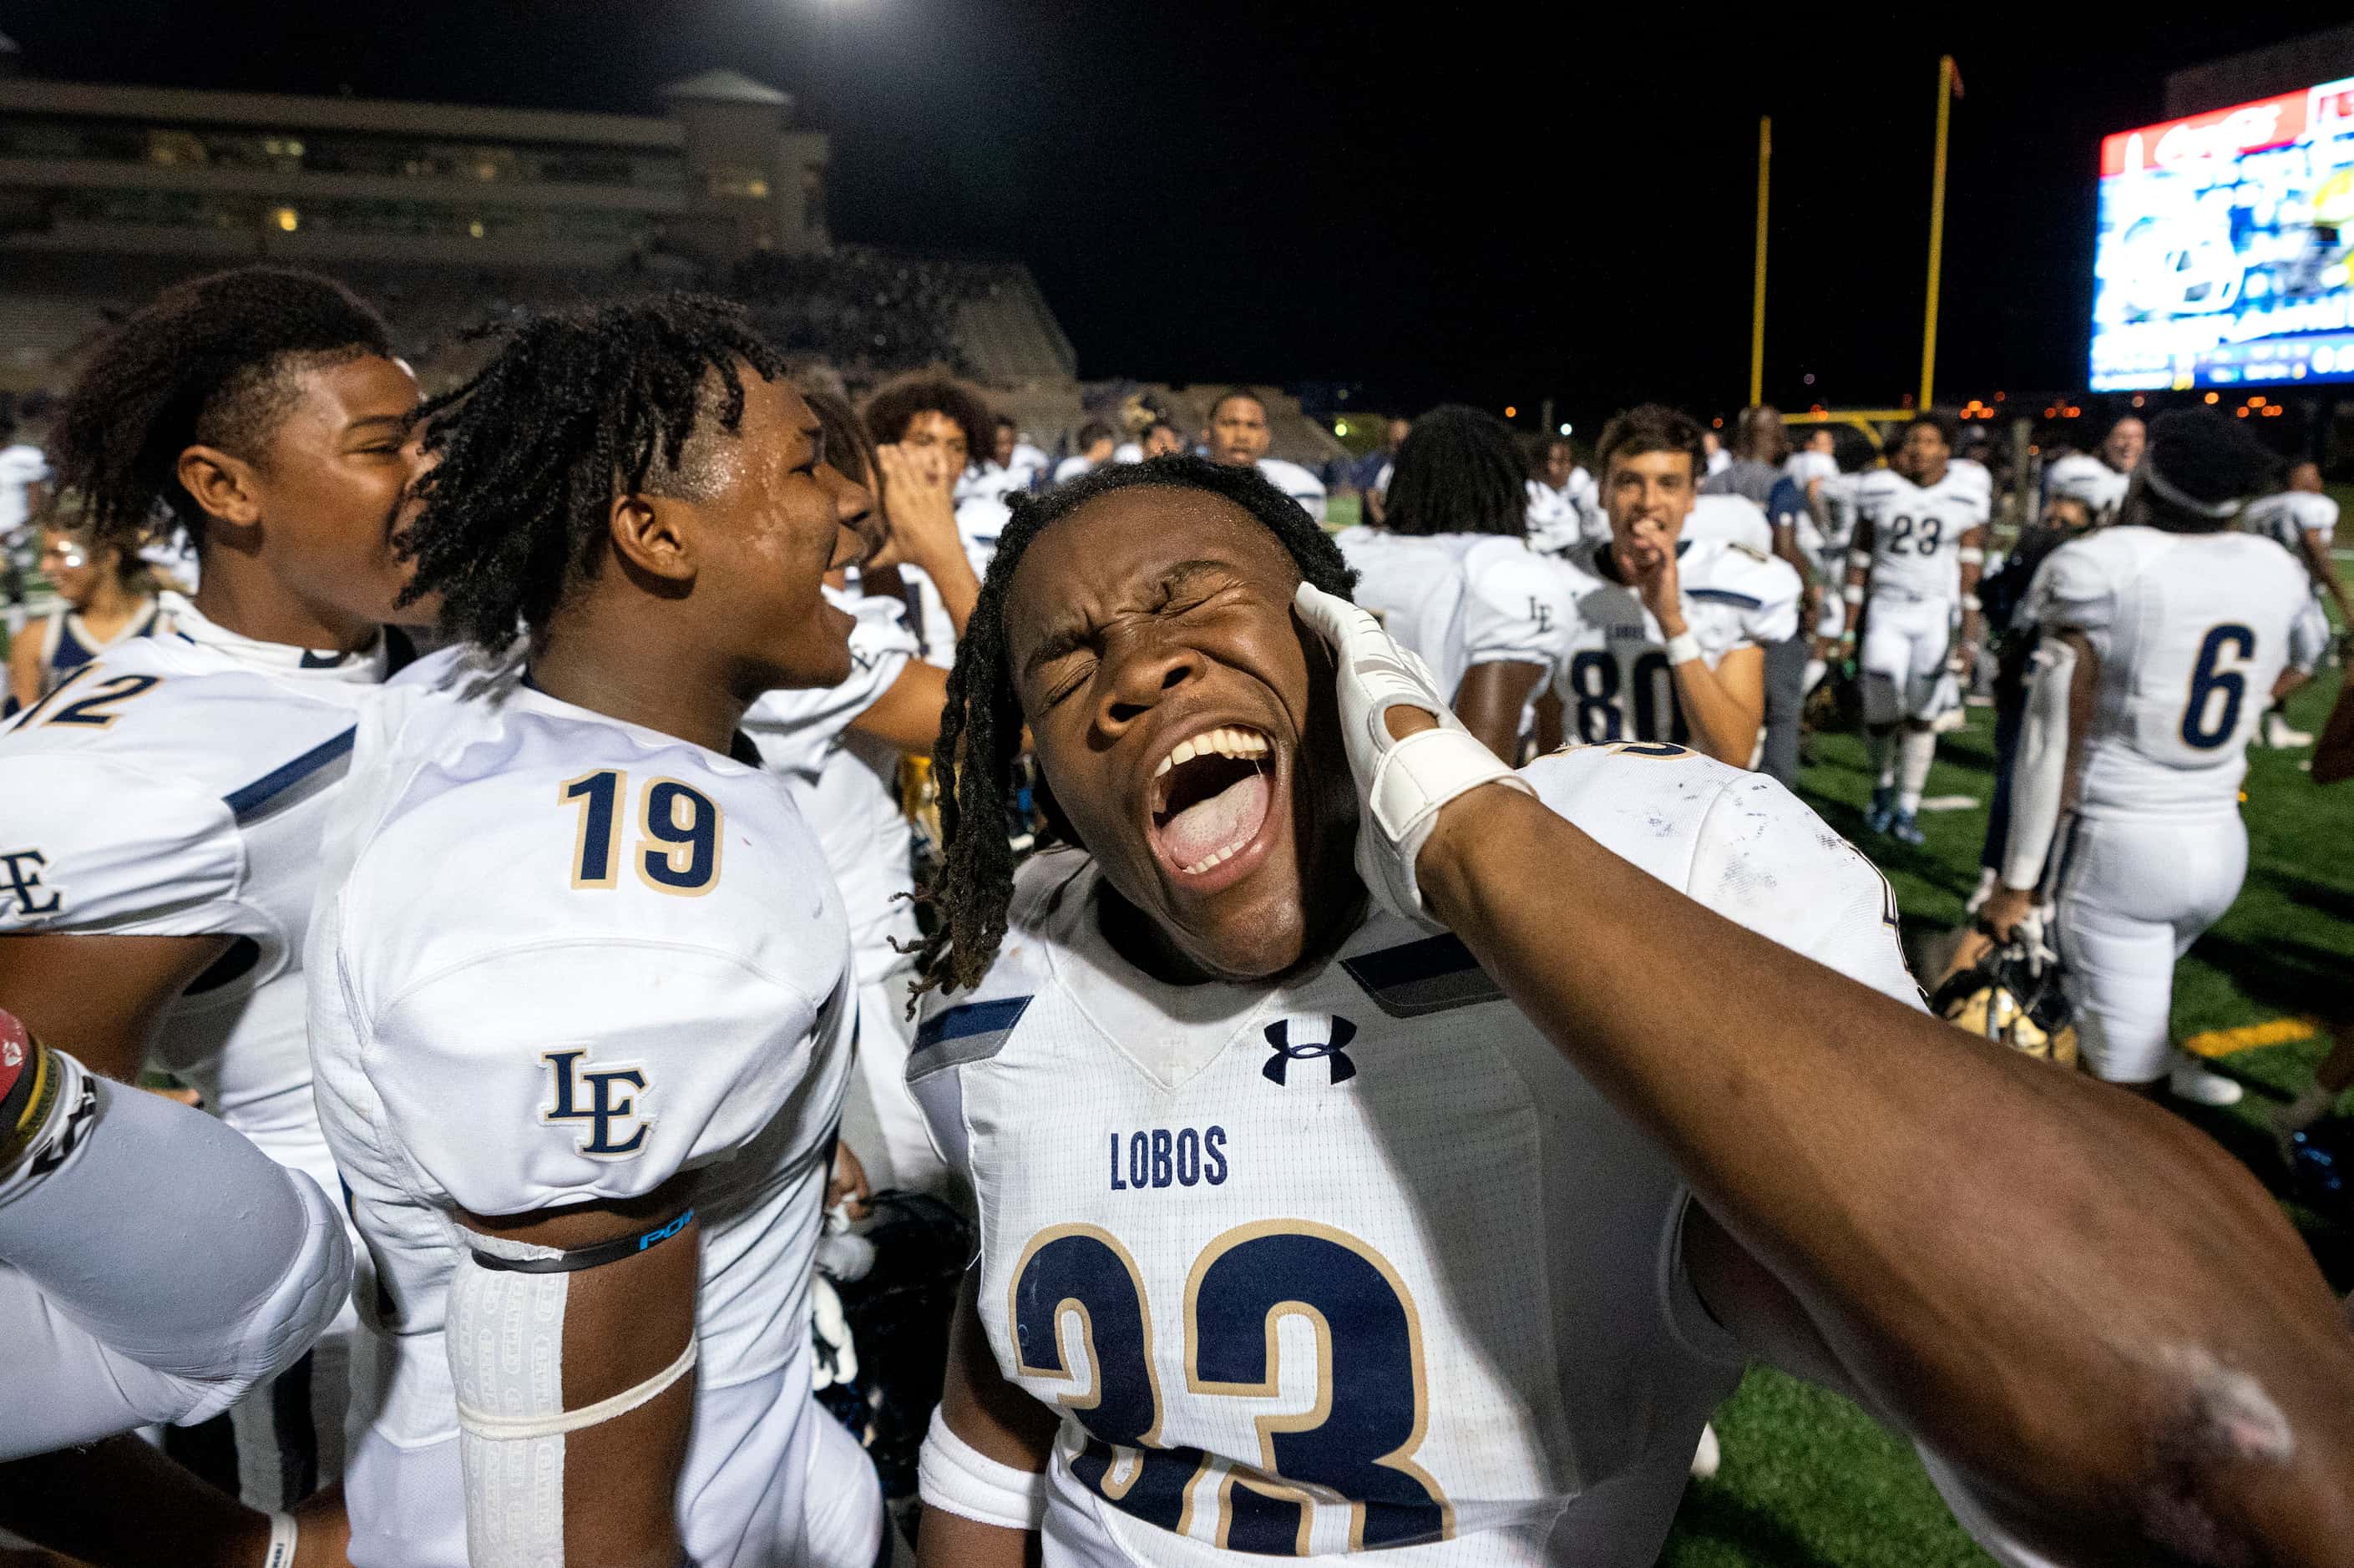 Little Elm sophomore linebacker Osa Adonri (33) leads the crowd in a chant after his team’s...